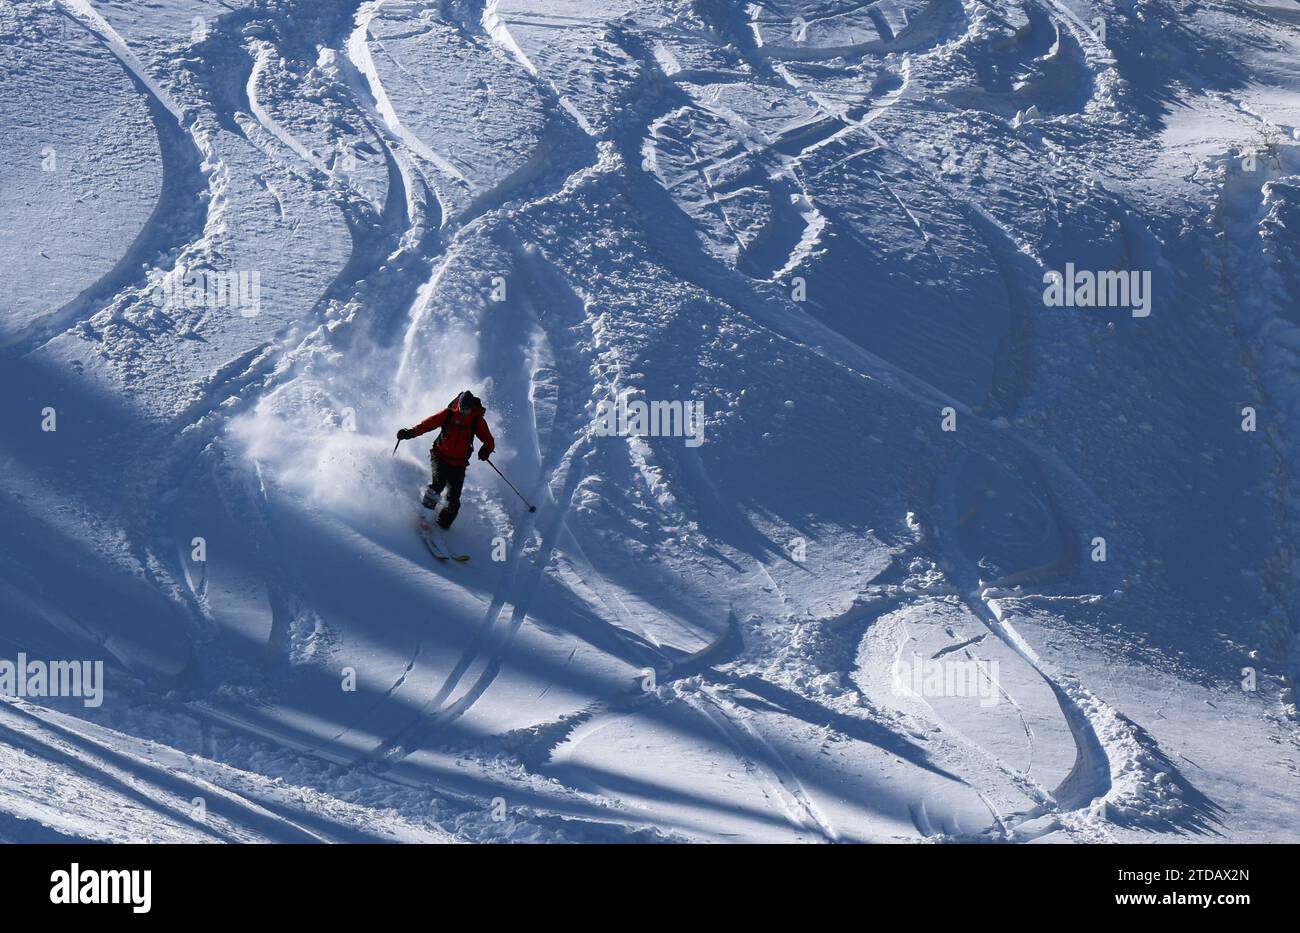 Winter weather in Bulgaria. A skier is going down a ski slope with new snow. Stock Photo